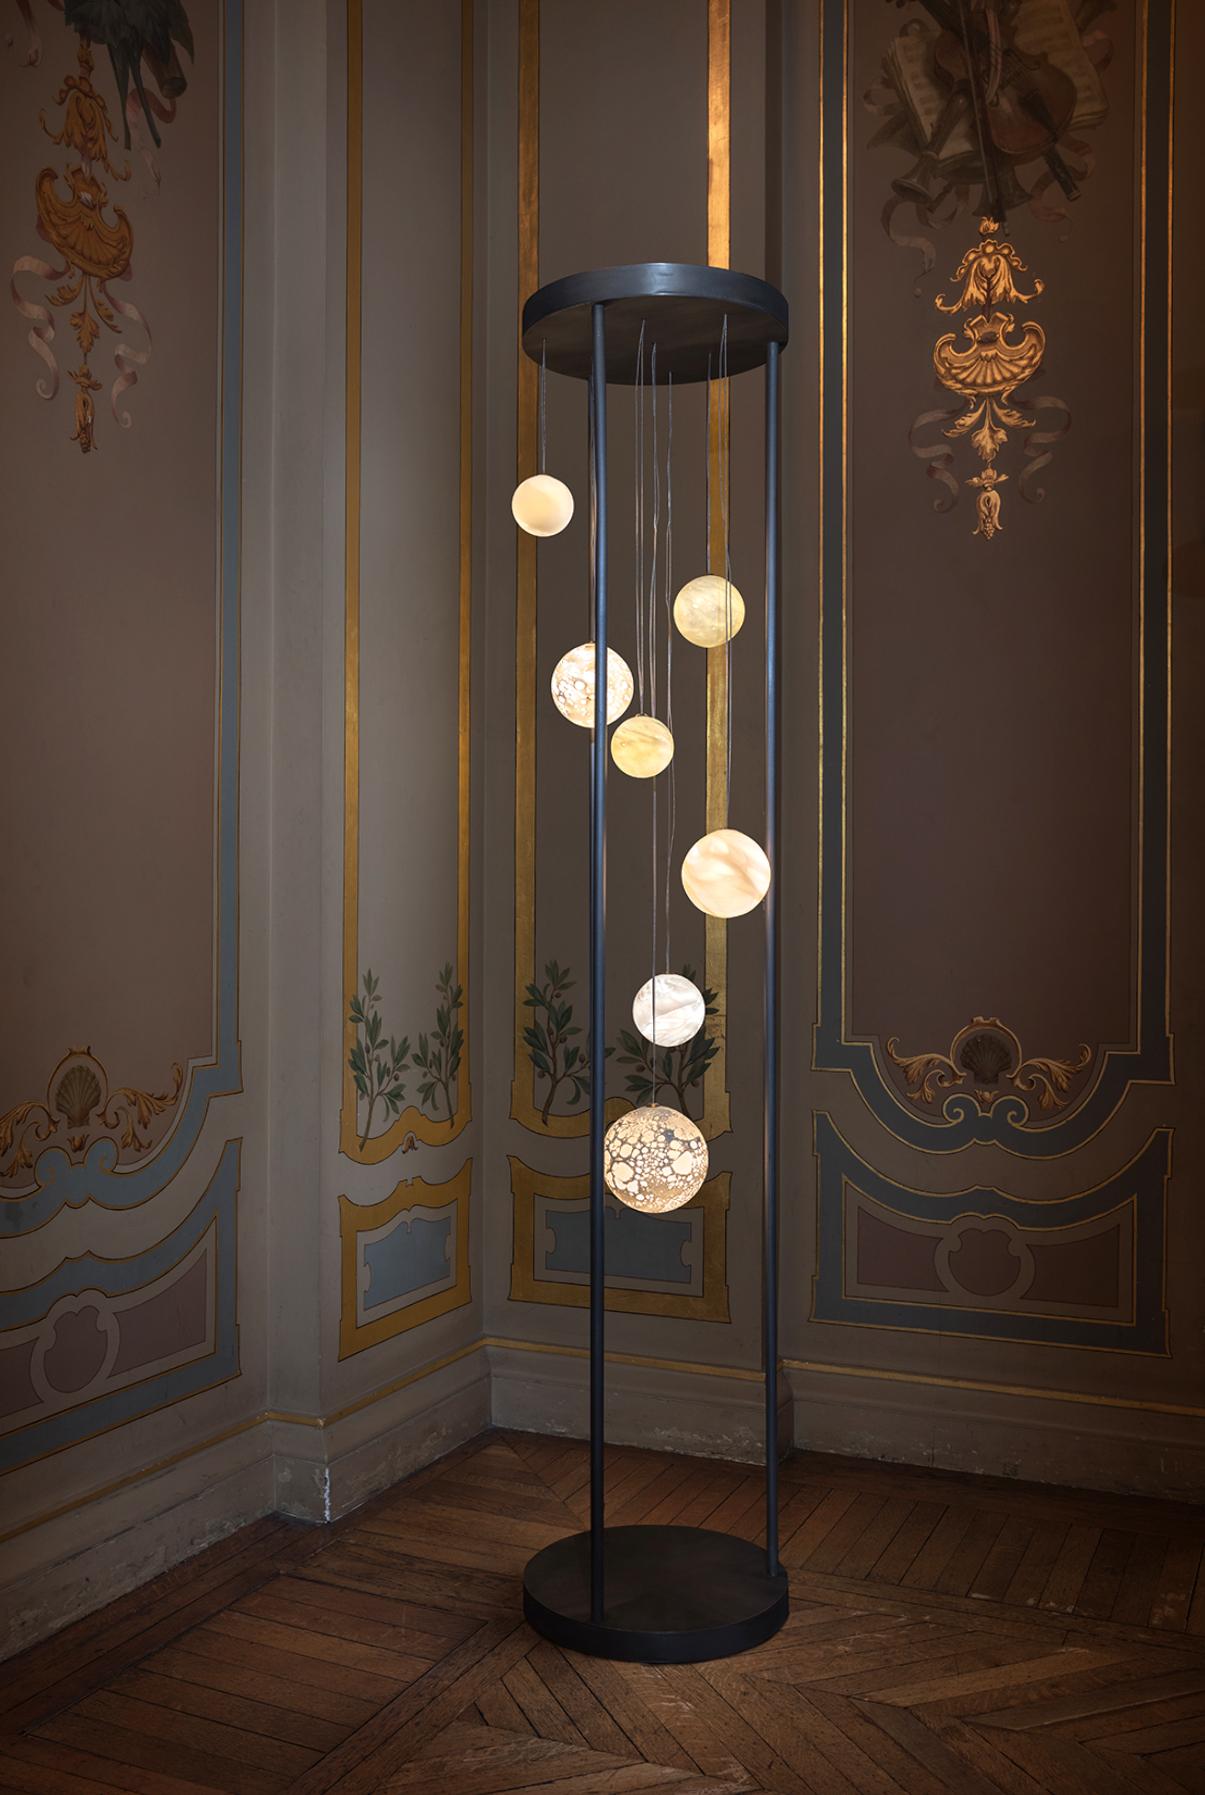 Planets floor lamp - Ludovic Clément d’Armont.
Blown glass and brass.
Dimensions: 220 x 55 x 55 cm.
Each creation is unique.

Ludovic Clément d’Armont is in the continuation of a family tradition of centuries of gentle glassmakers, painters,